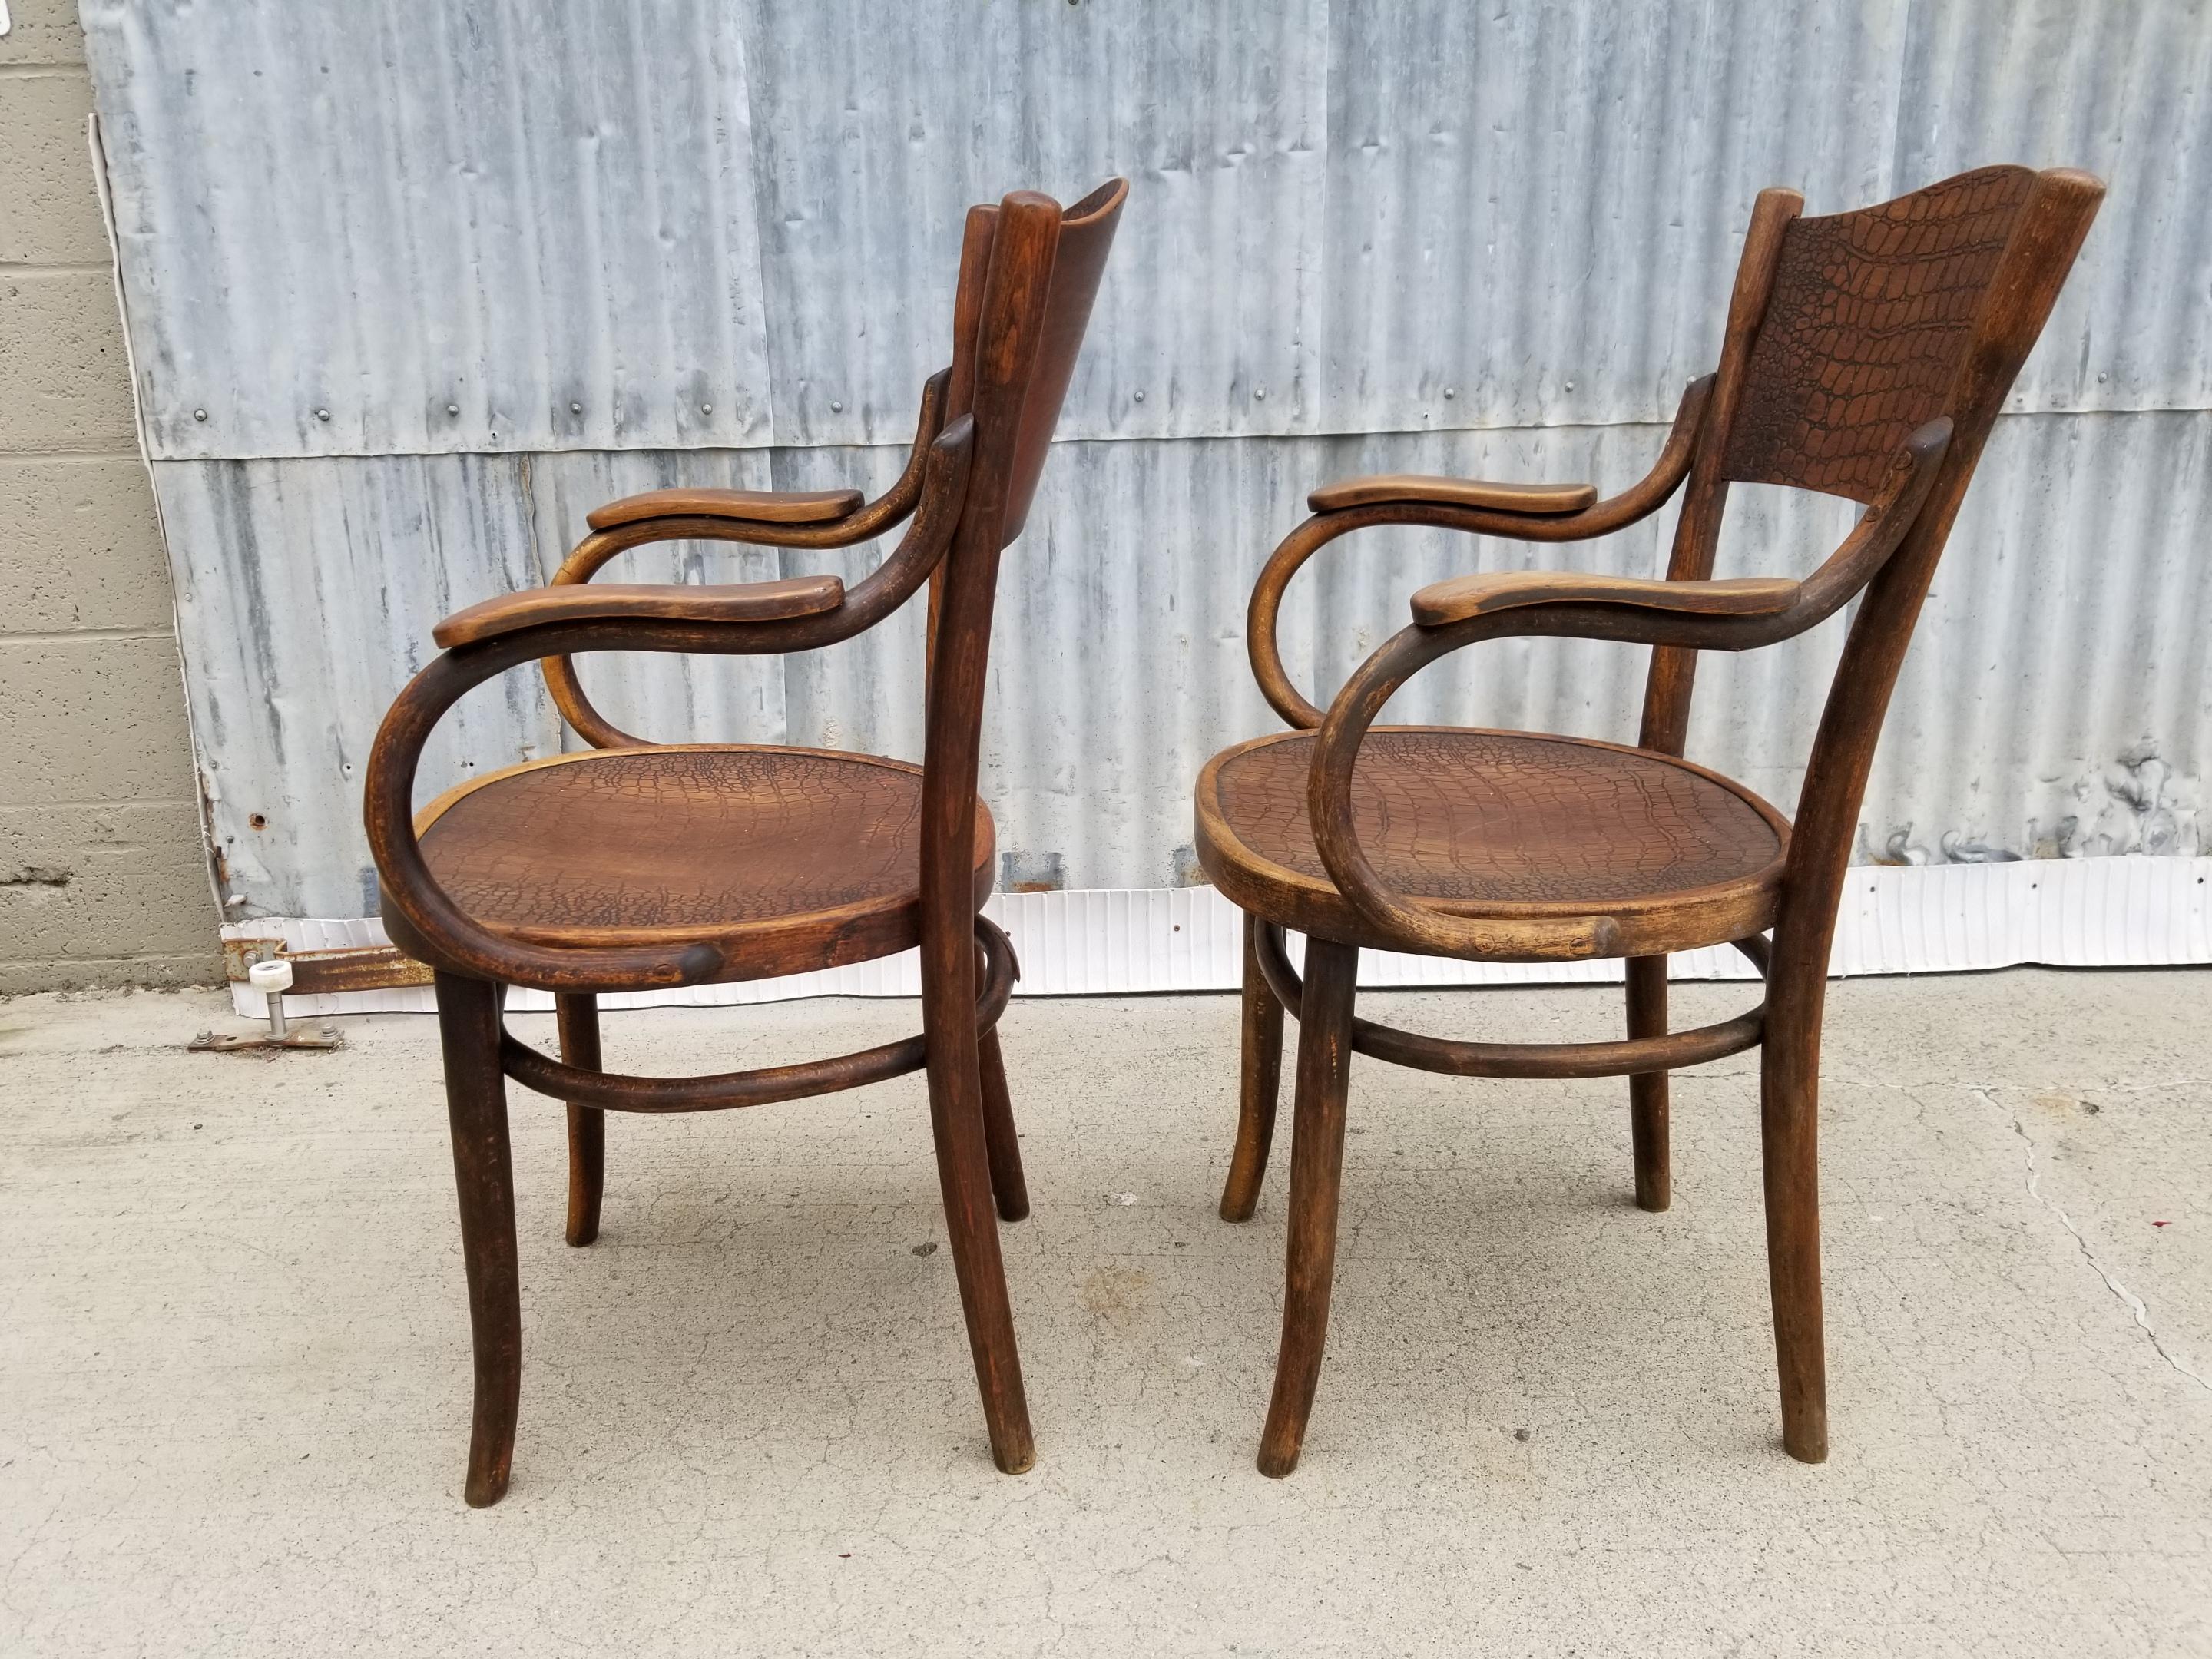 Pair of signed Thonet armchairs with alligator pattern seat and seat back. Retaining partial paper label and impressed 